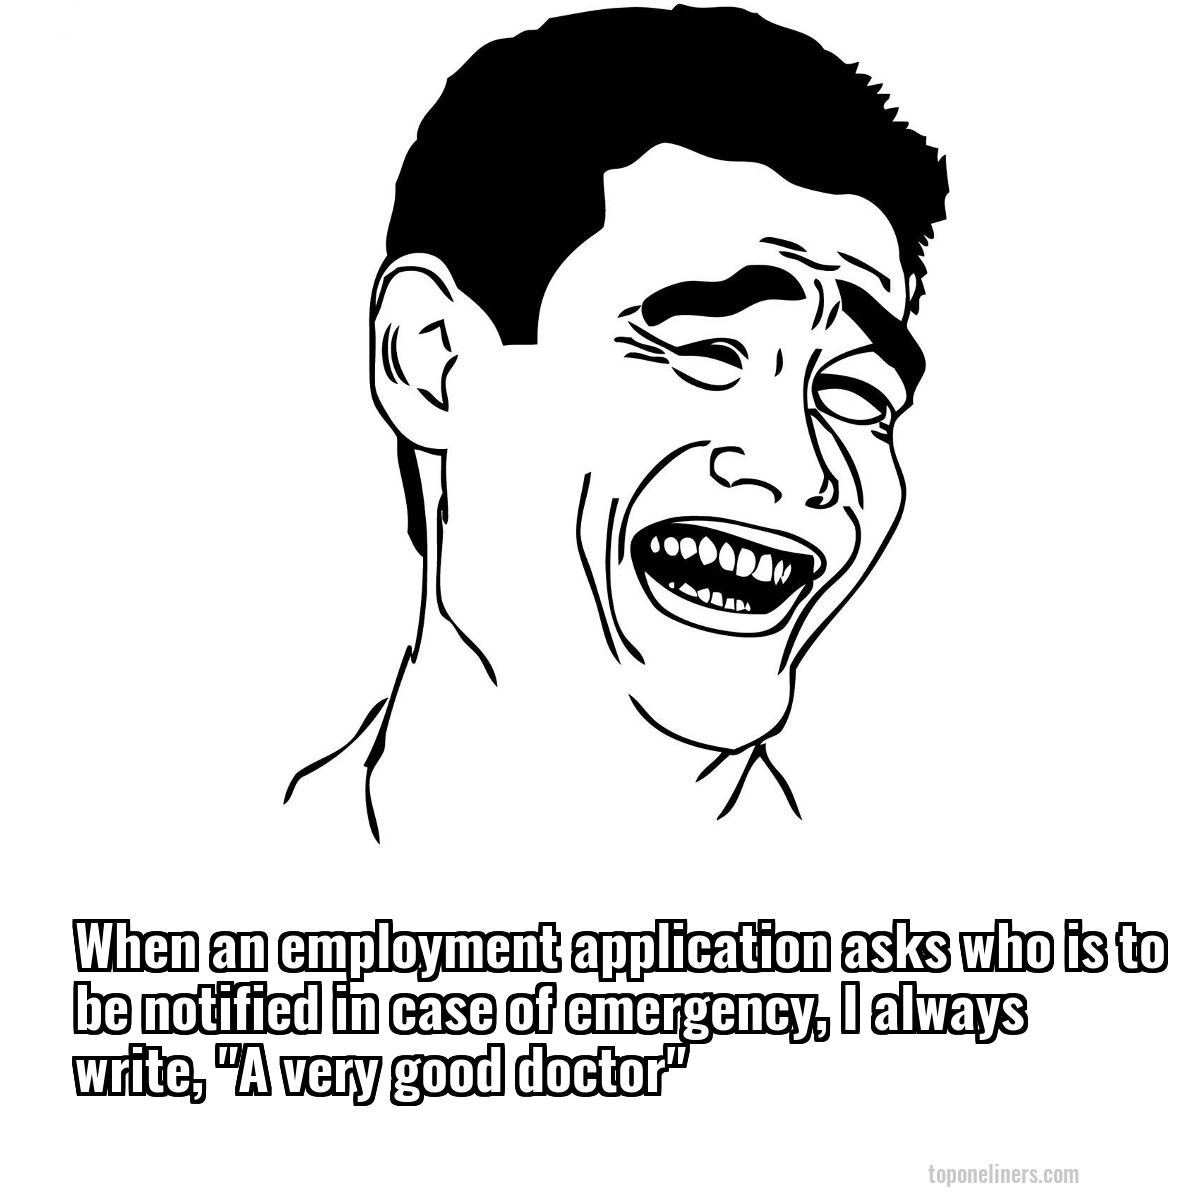 When an employment application asks who is to be notified in case of emergency, I always write, "A very good doctor"